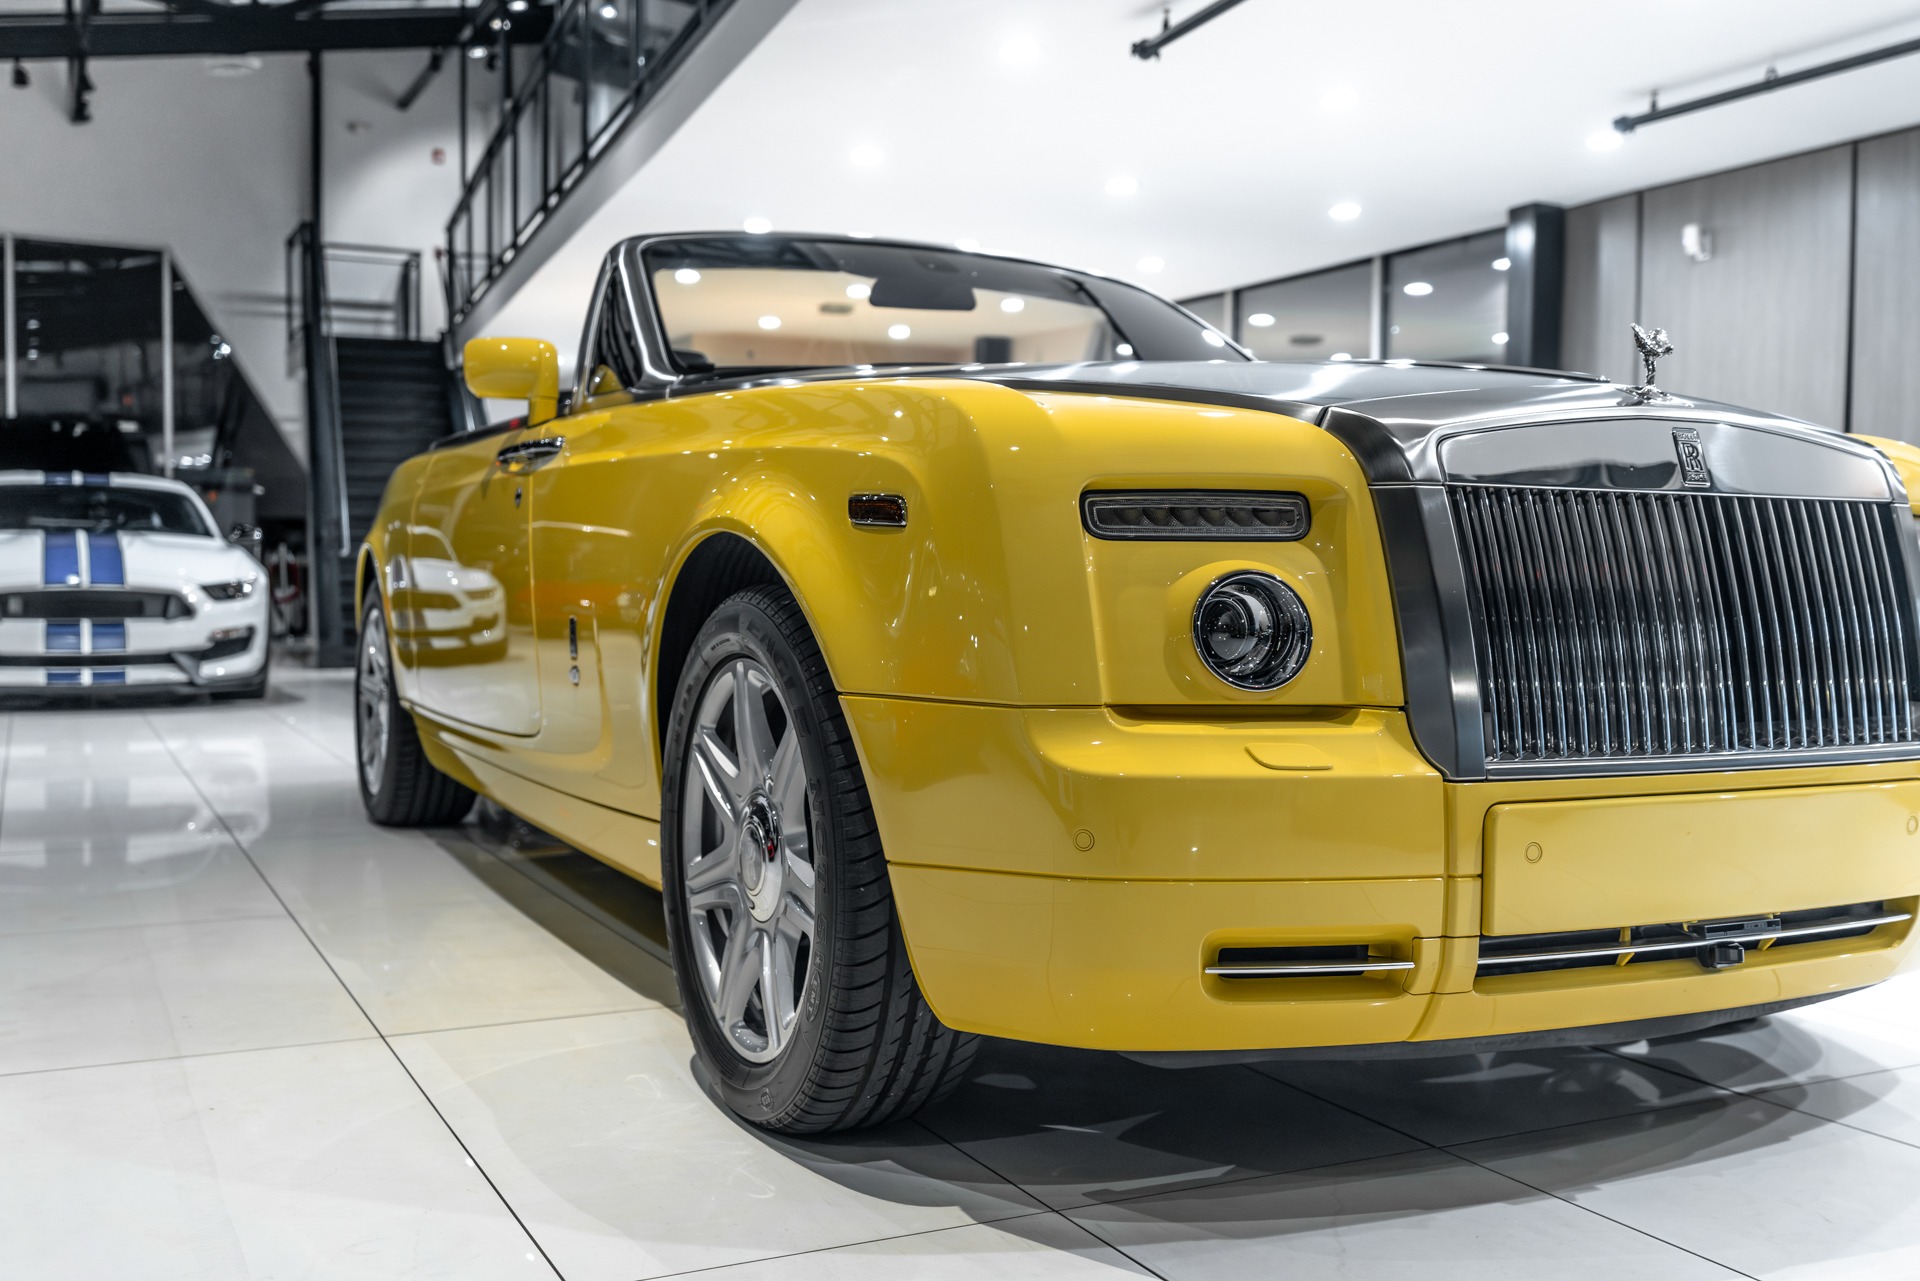 Used-2009-Rolls-Royce-Phantom-Drophead-Coupe-Convertible-1OF1-LA-Autoshow-Special-Edition-MSRP-499K-Stunning